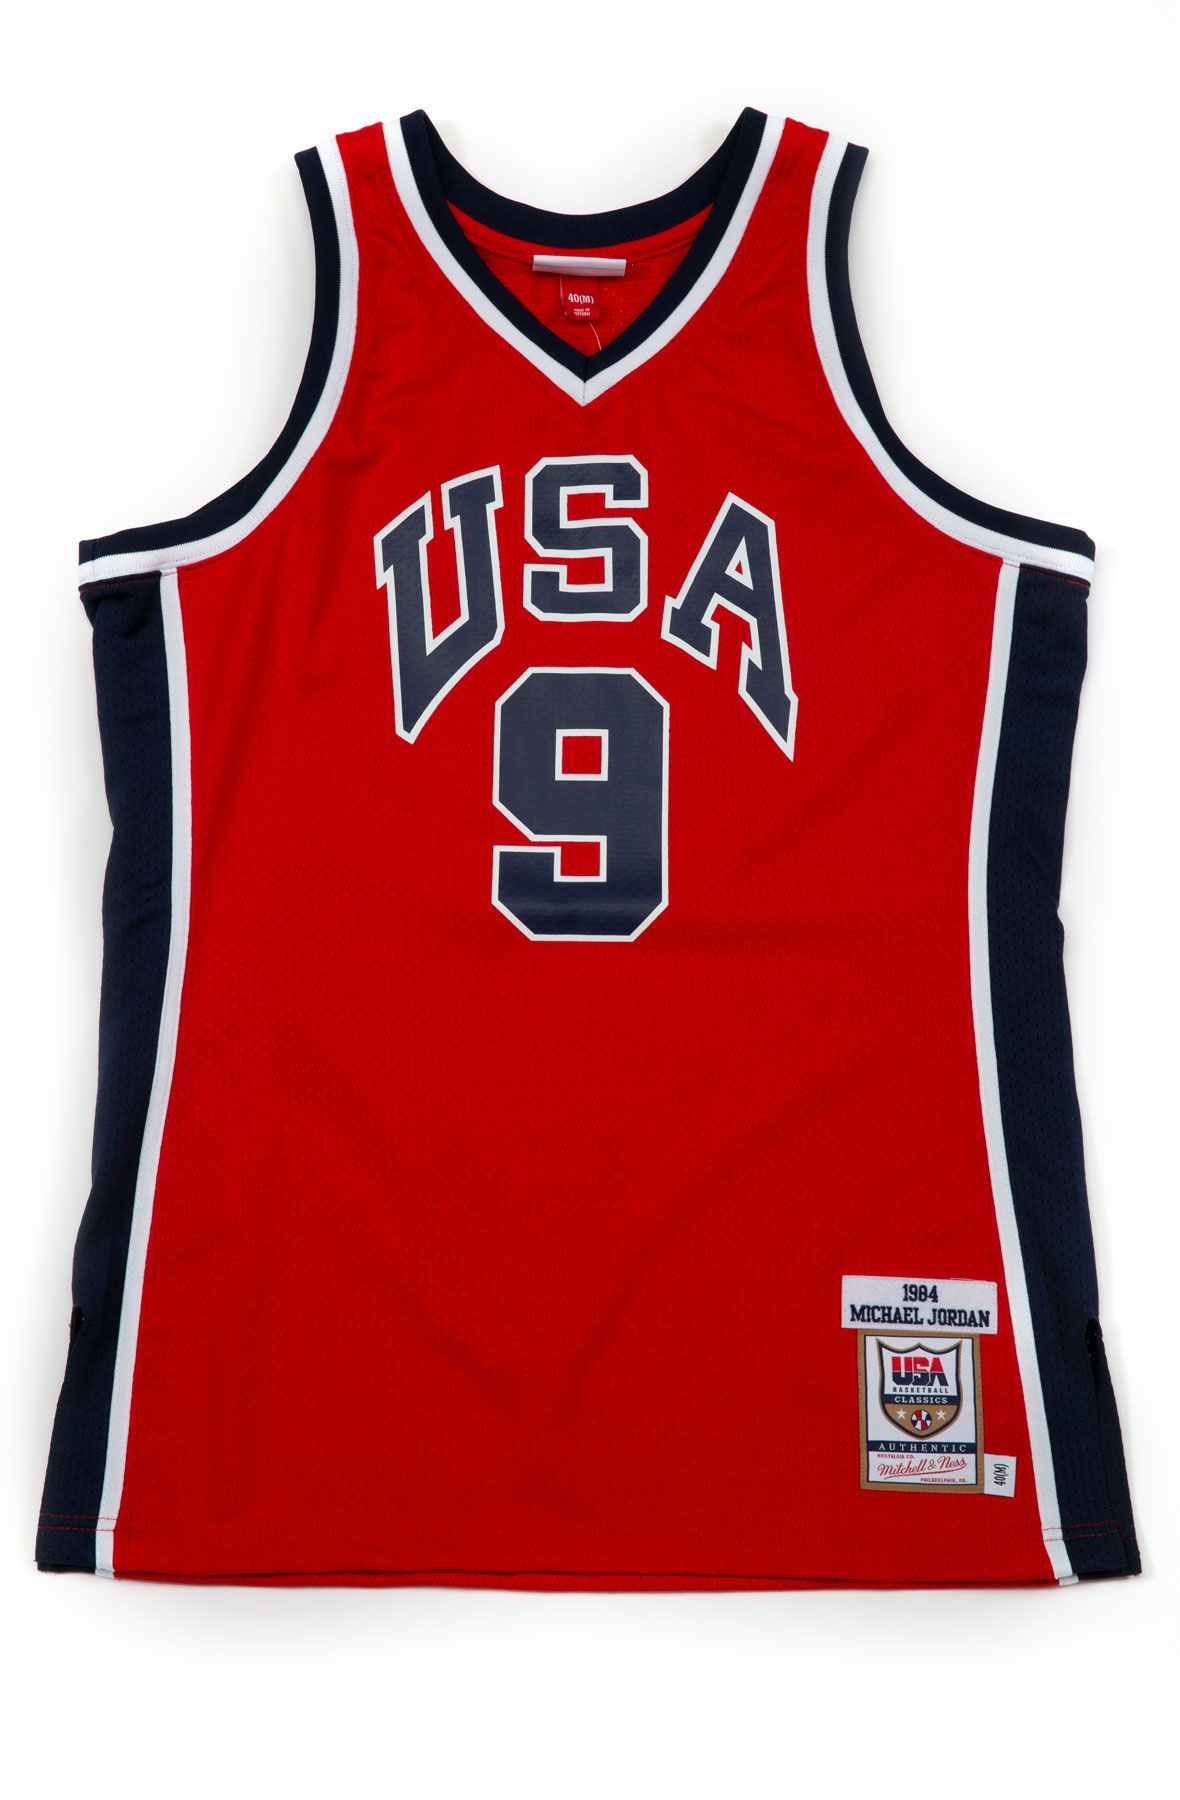 MITCHELL AND NESS Michael Jordan 1984 Team USA Authentic Jersey ...